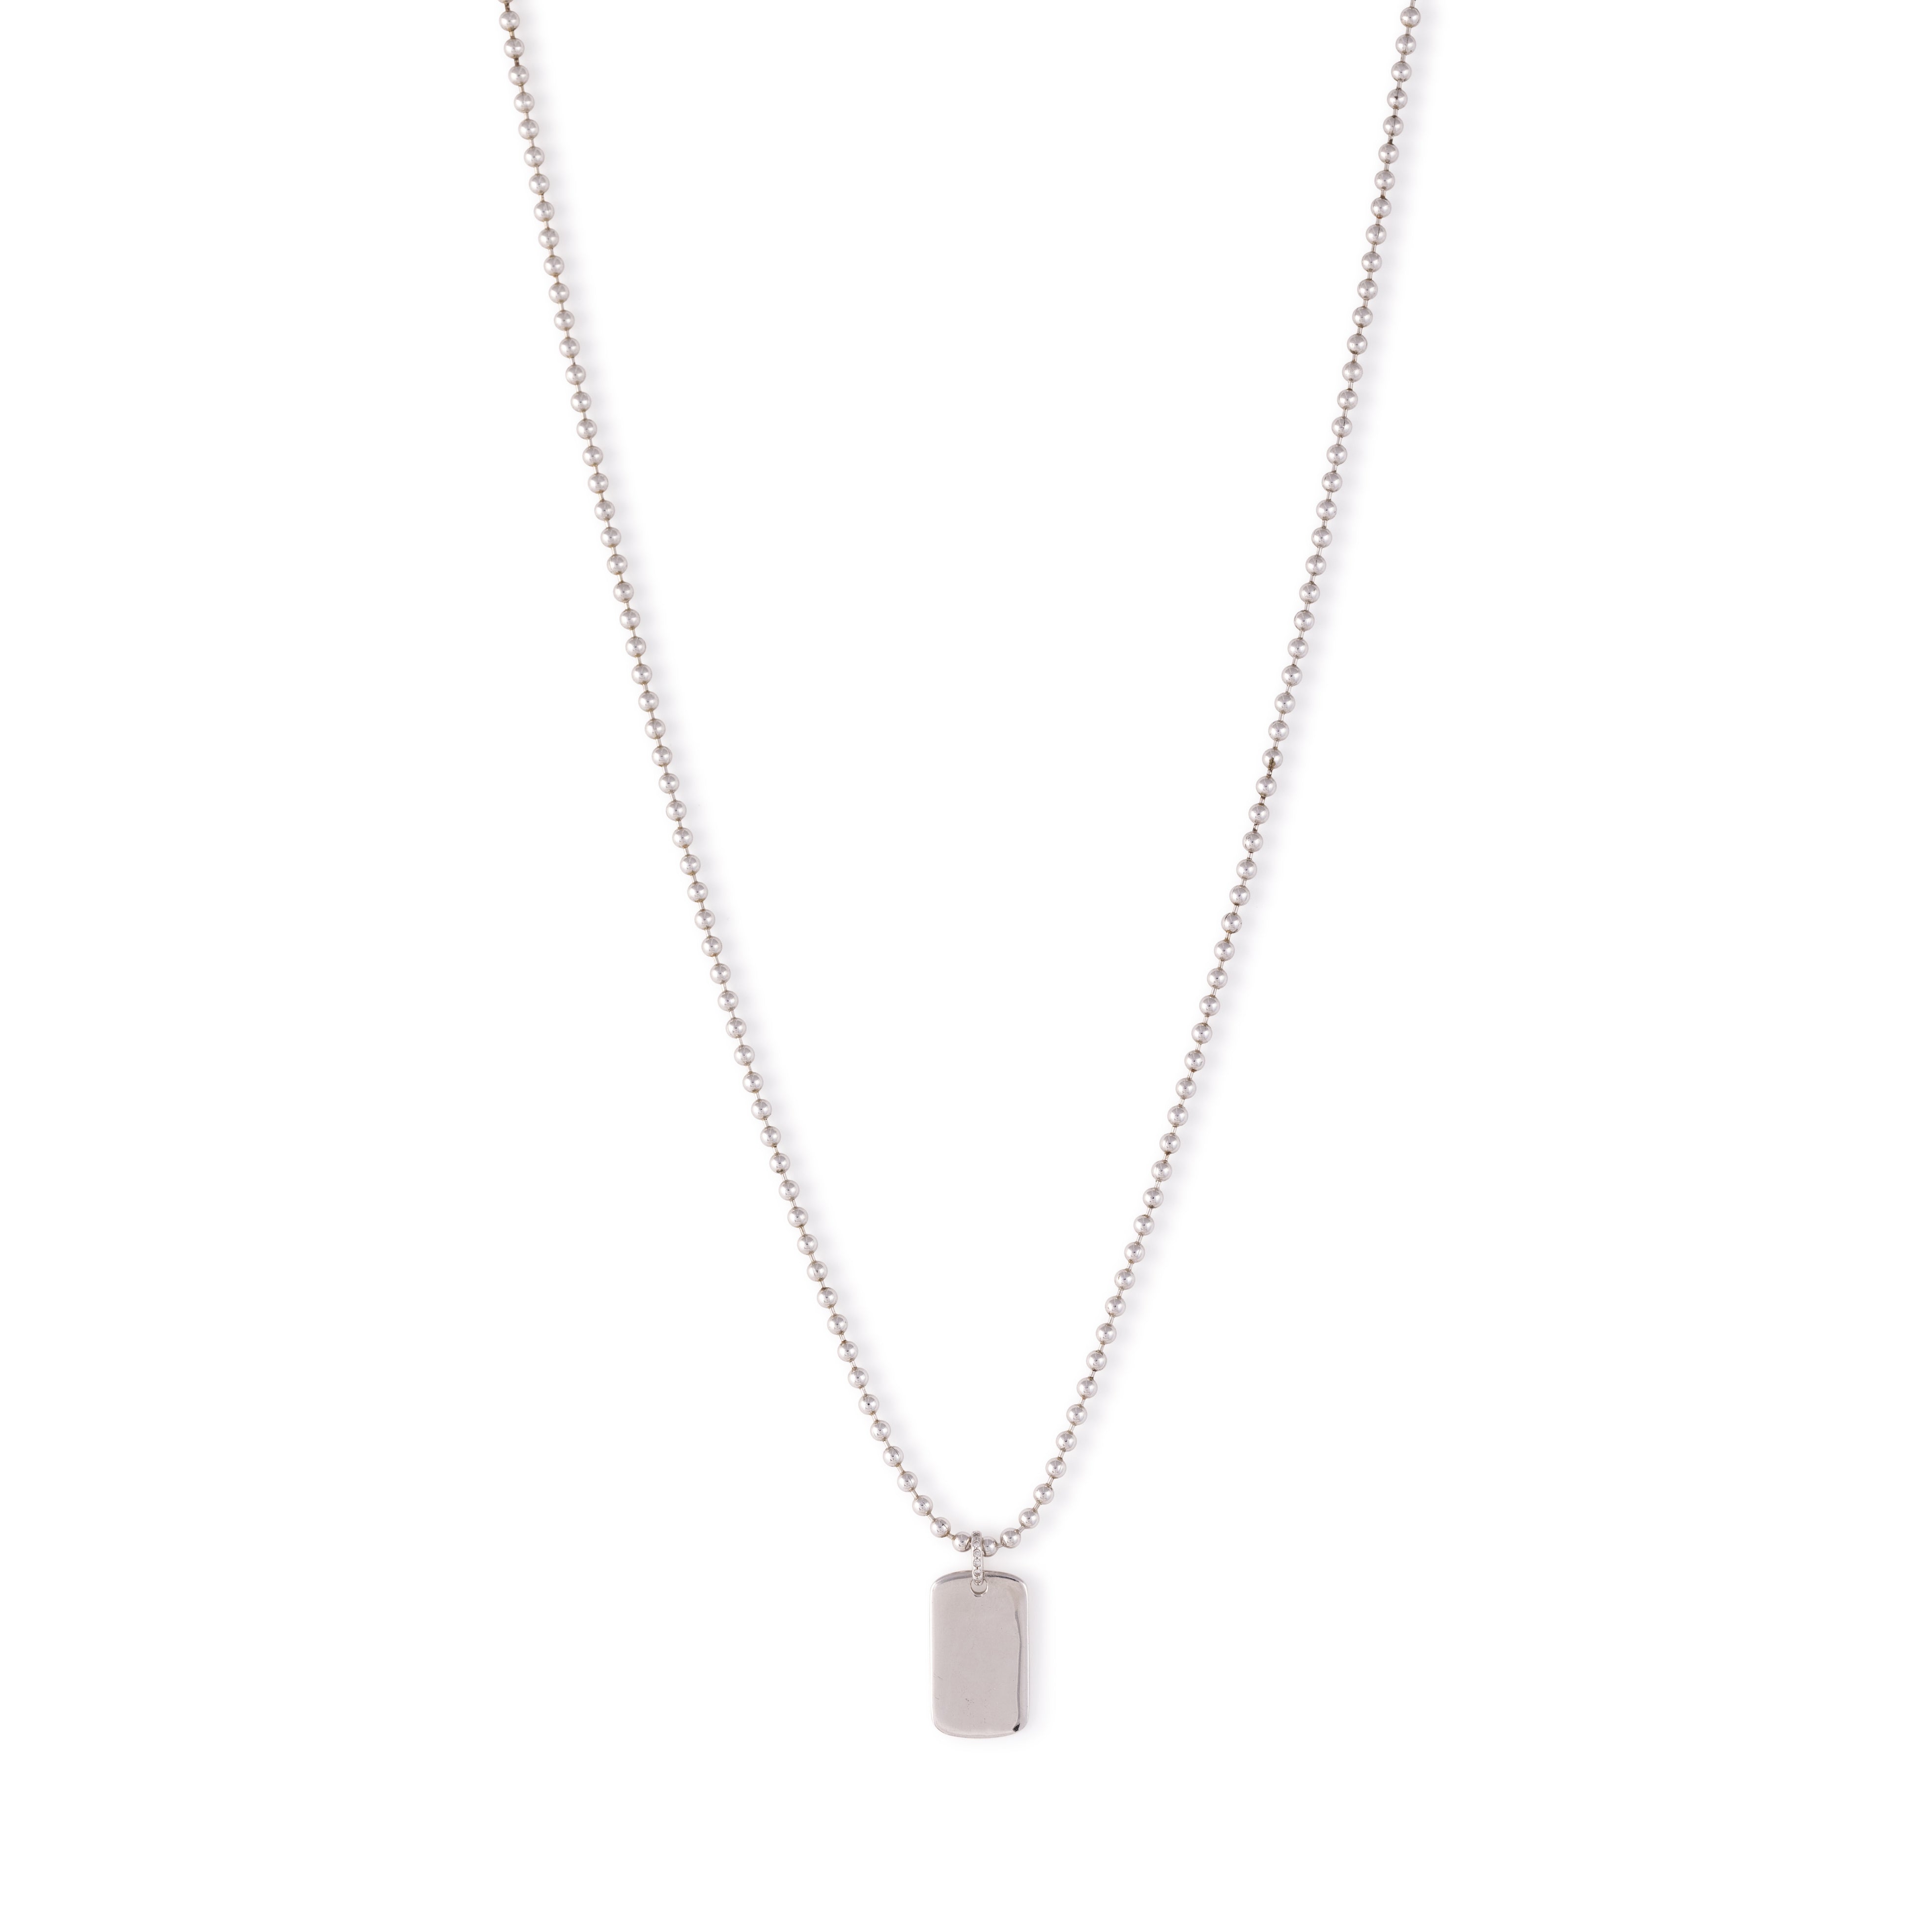 Silver Ball Chain with Dogtag pendant with CZ pav̩ on the bail